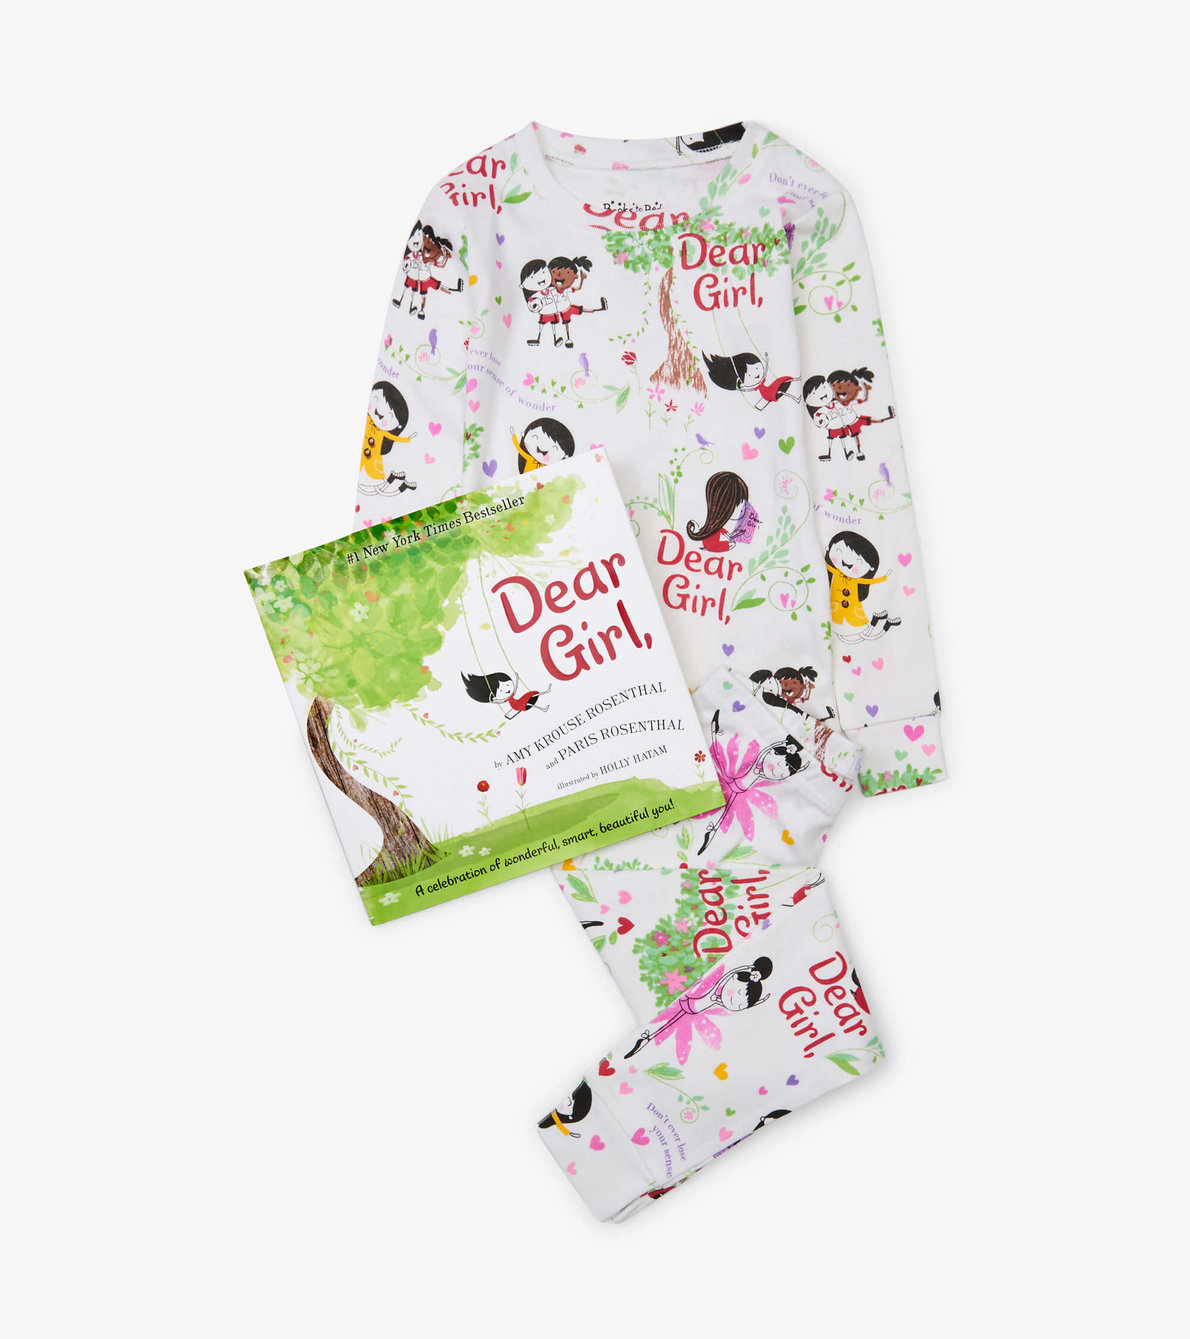 View larger image of Dear Girl Book and Pajama Set